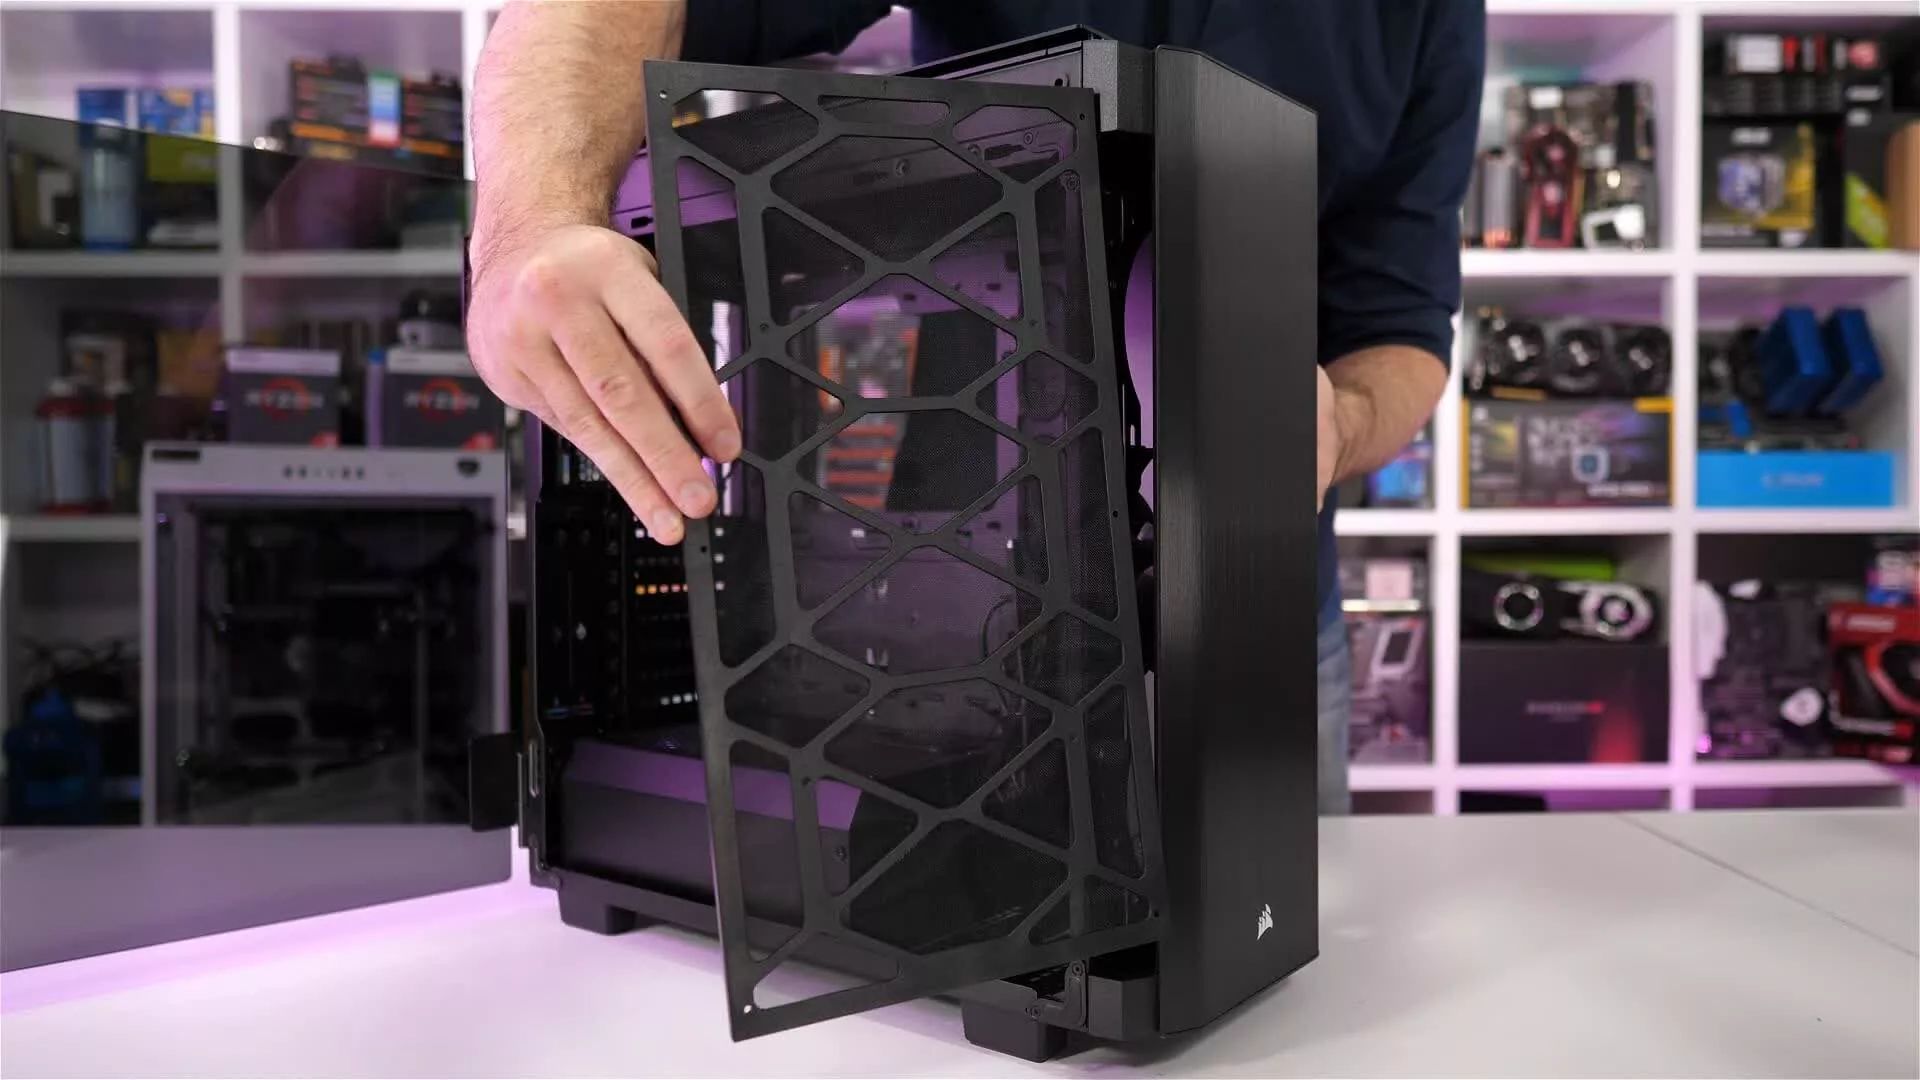 How To Use An Old PC Case